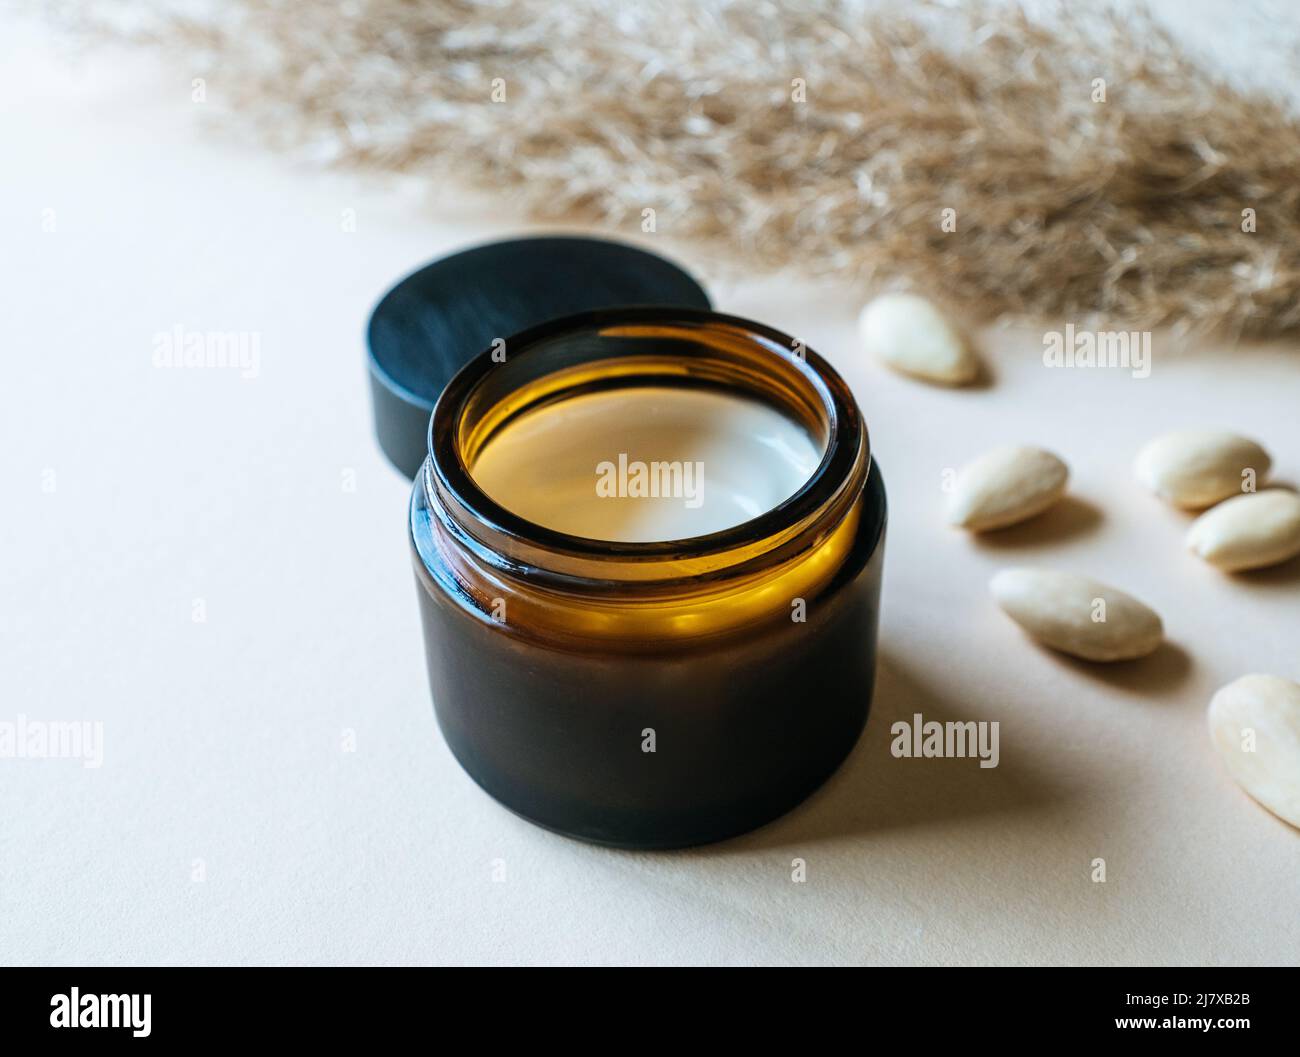 DIY homemade sustainable natural cosmetics skincare face creme with almond oil Stock Photo